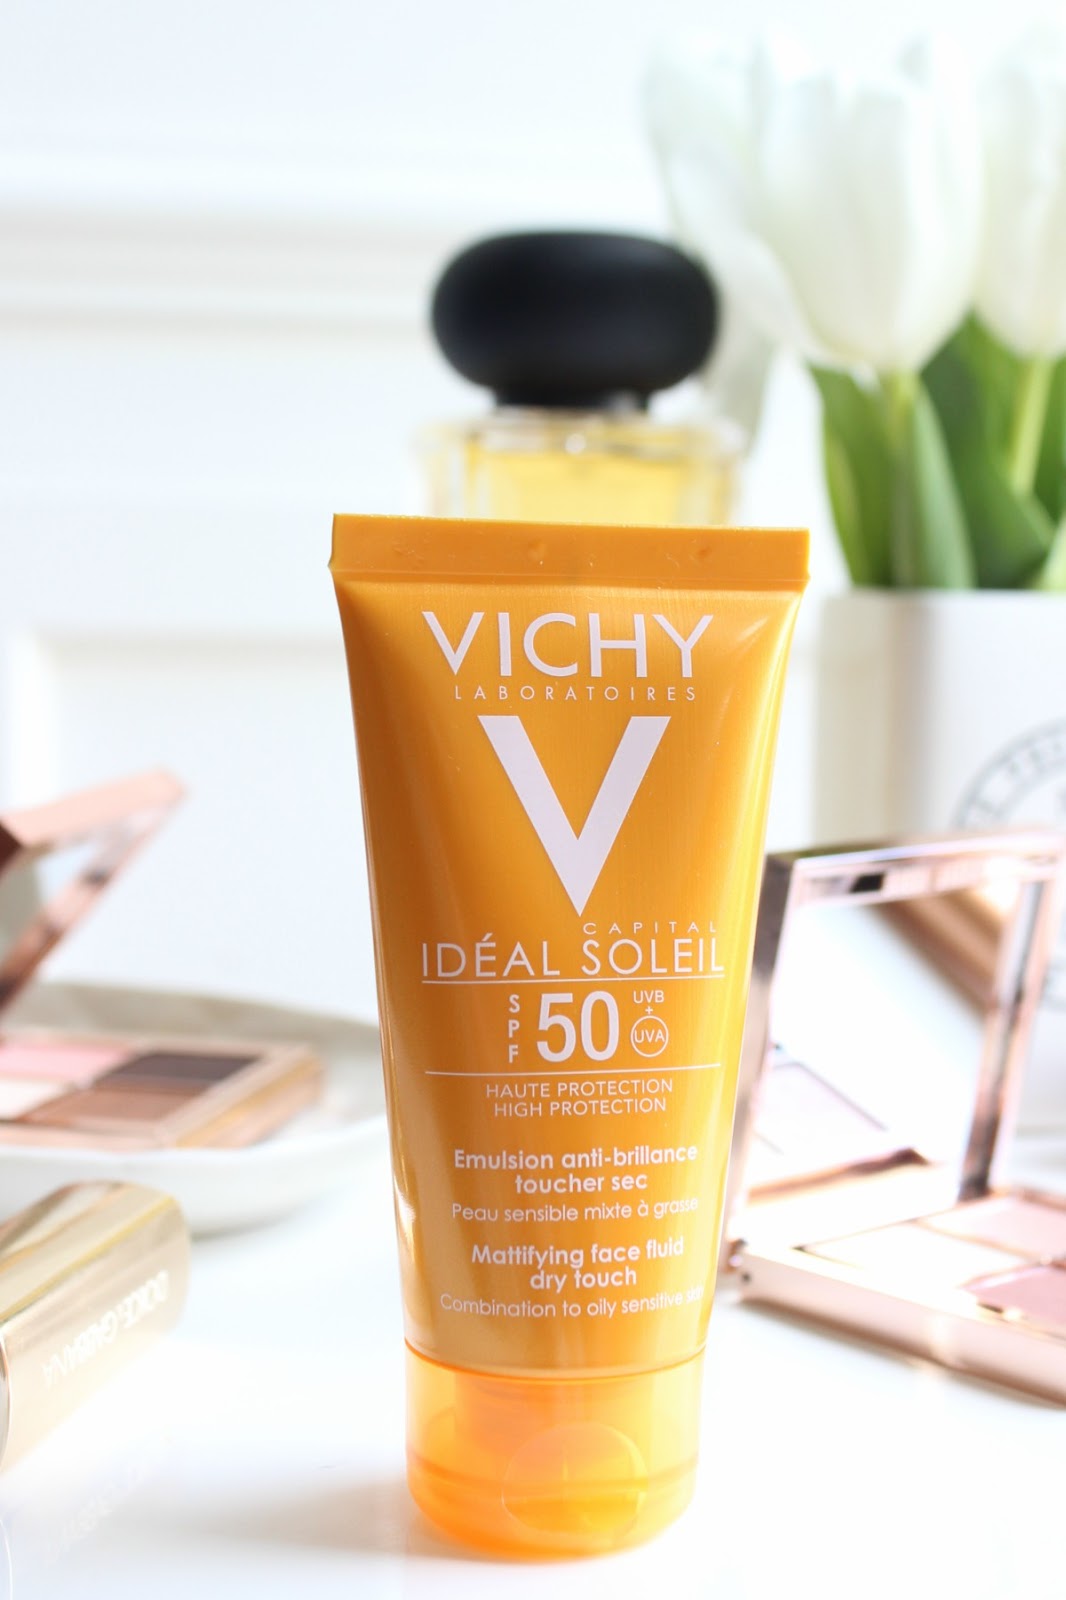 Vichy Ideal Soleil Mattifying Face Fluid Dry Touch SPF50 